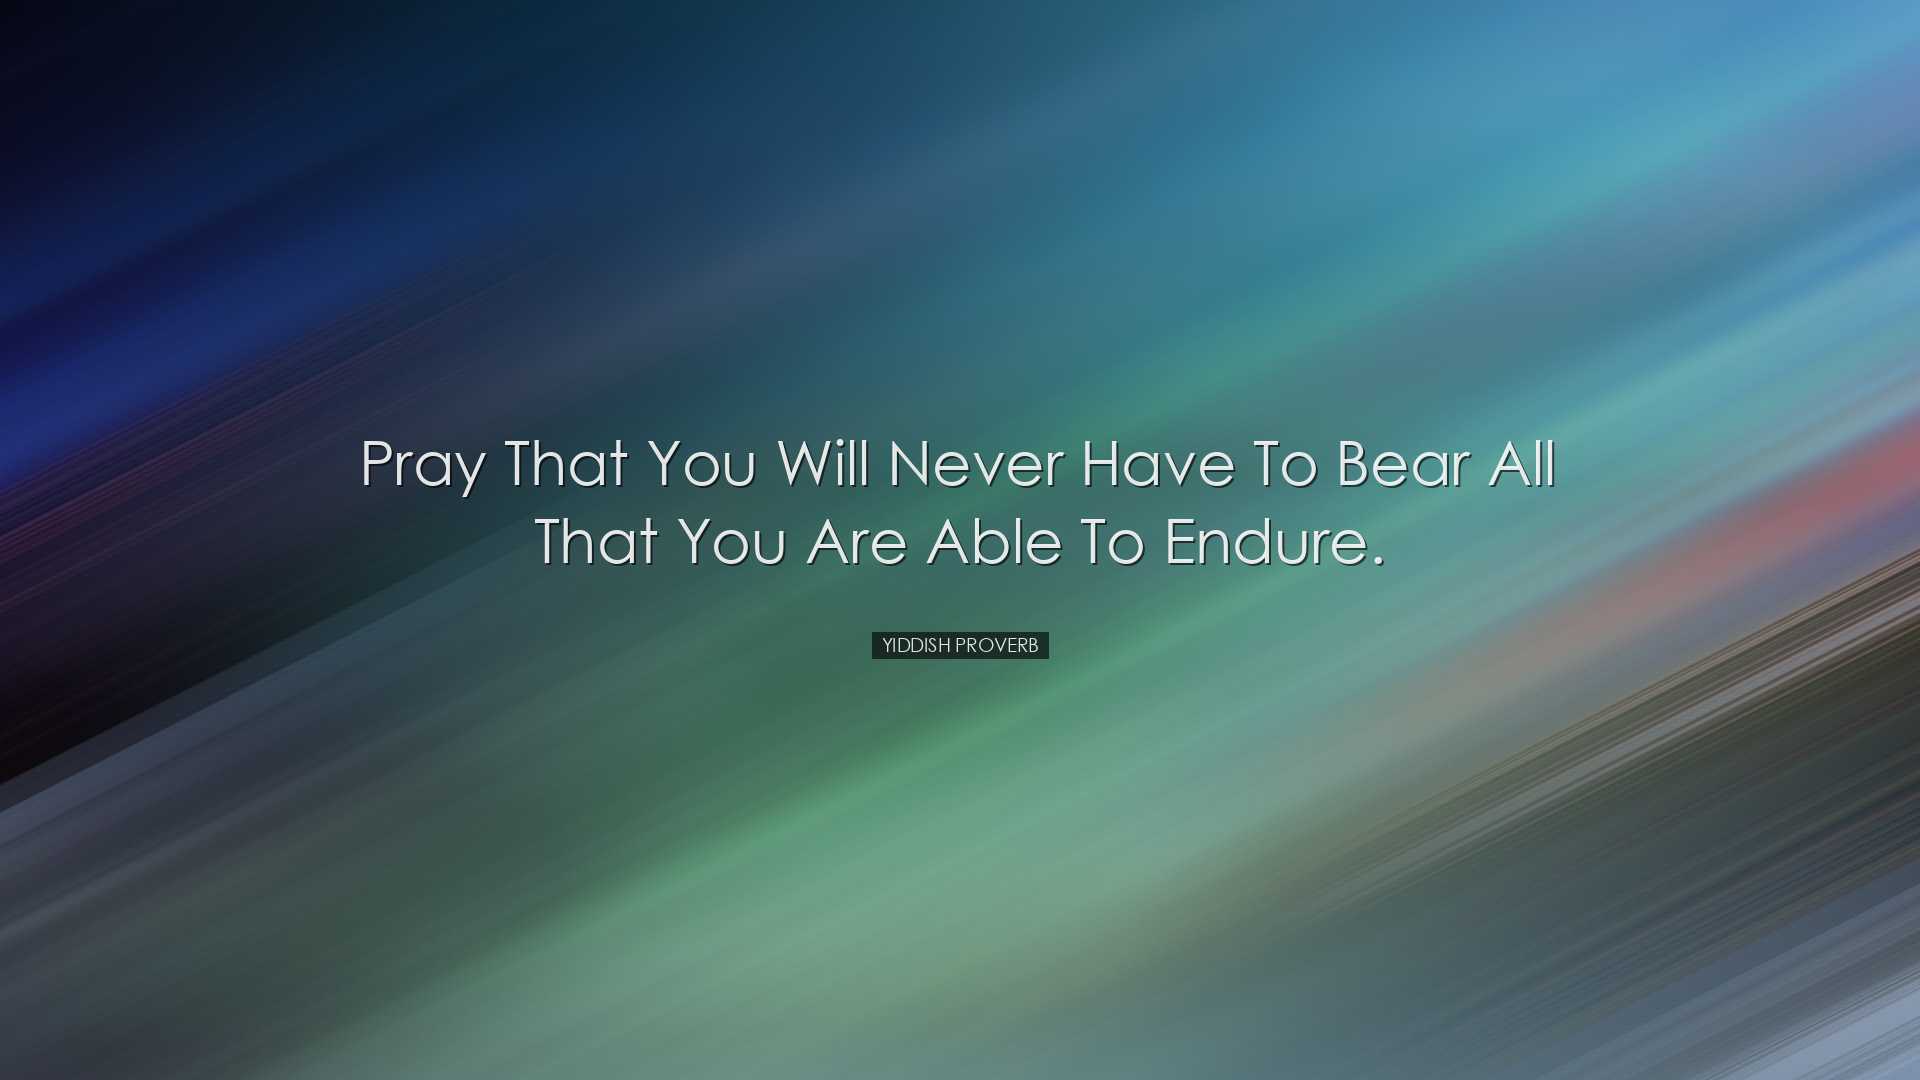 Pray that you will never have to bear all that you are able to end